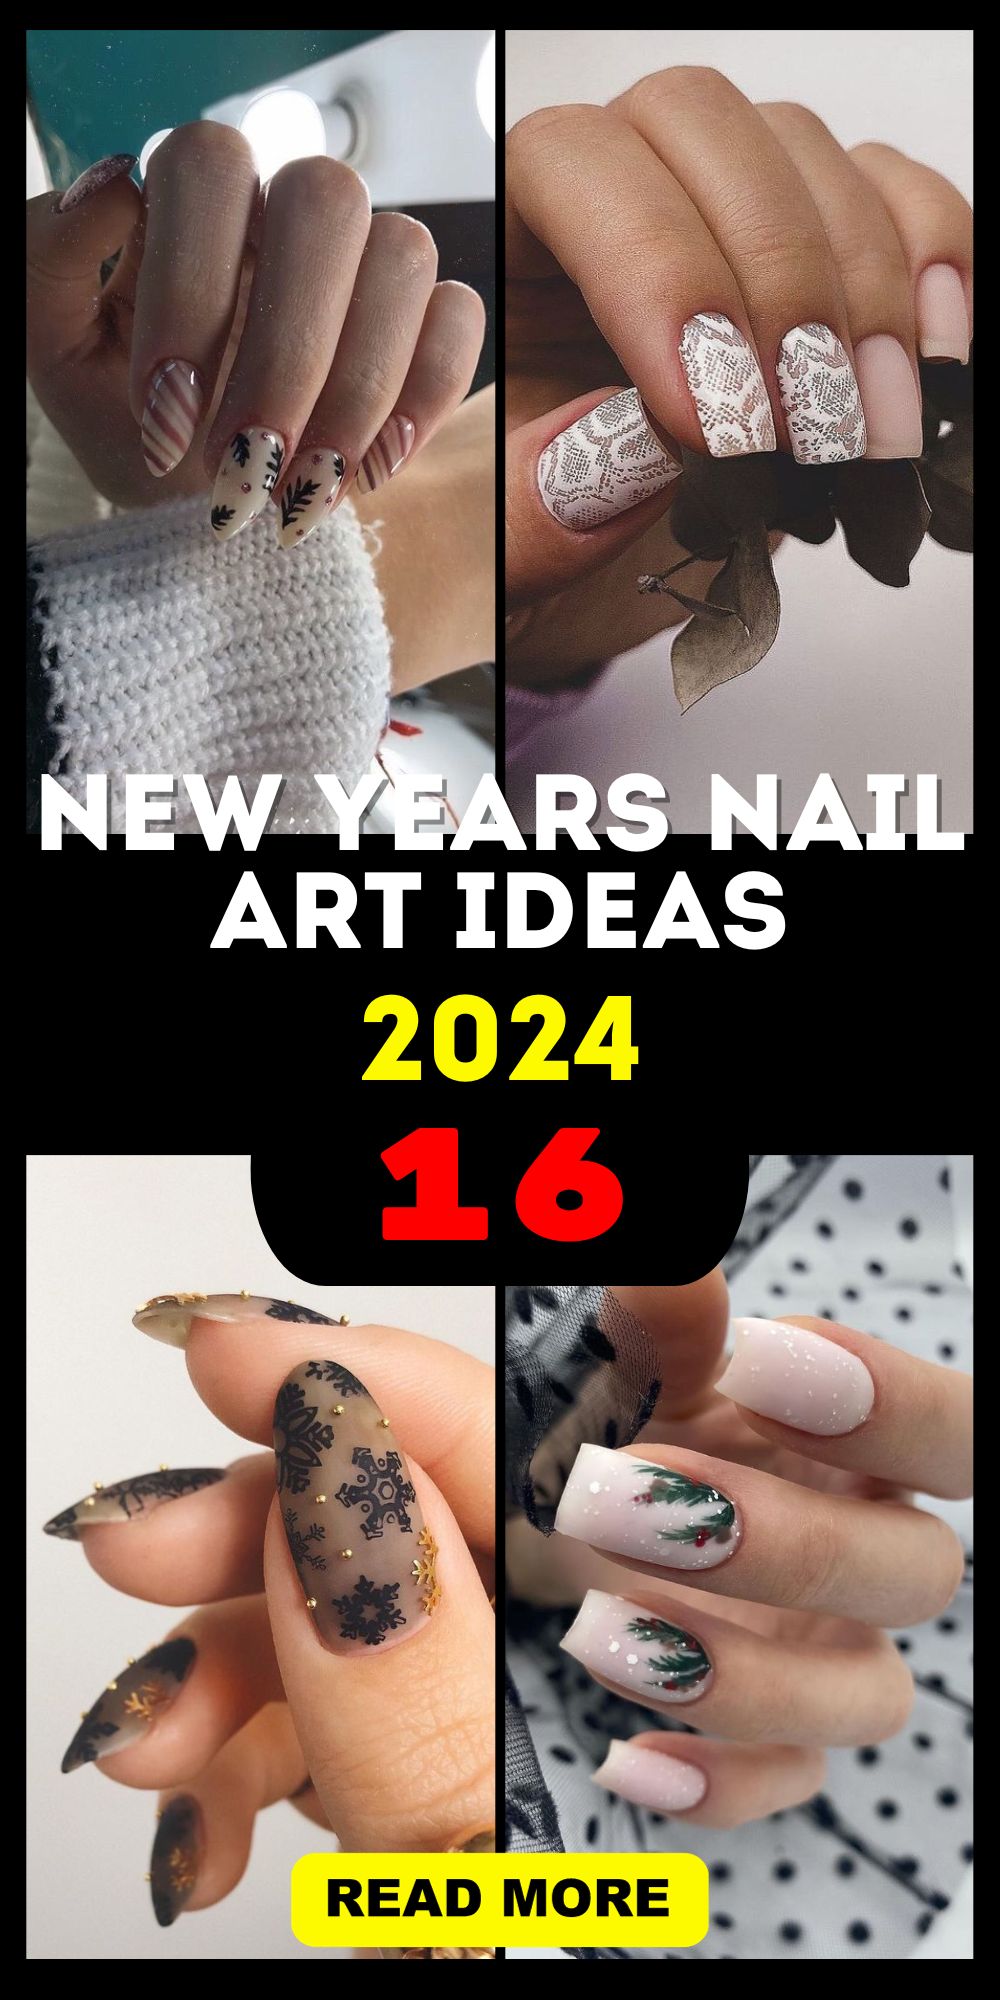 Elevate Your Style with 2024 New Year's Nail Art: Lunar, Japanese, DIY ...